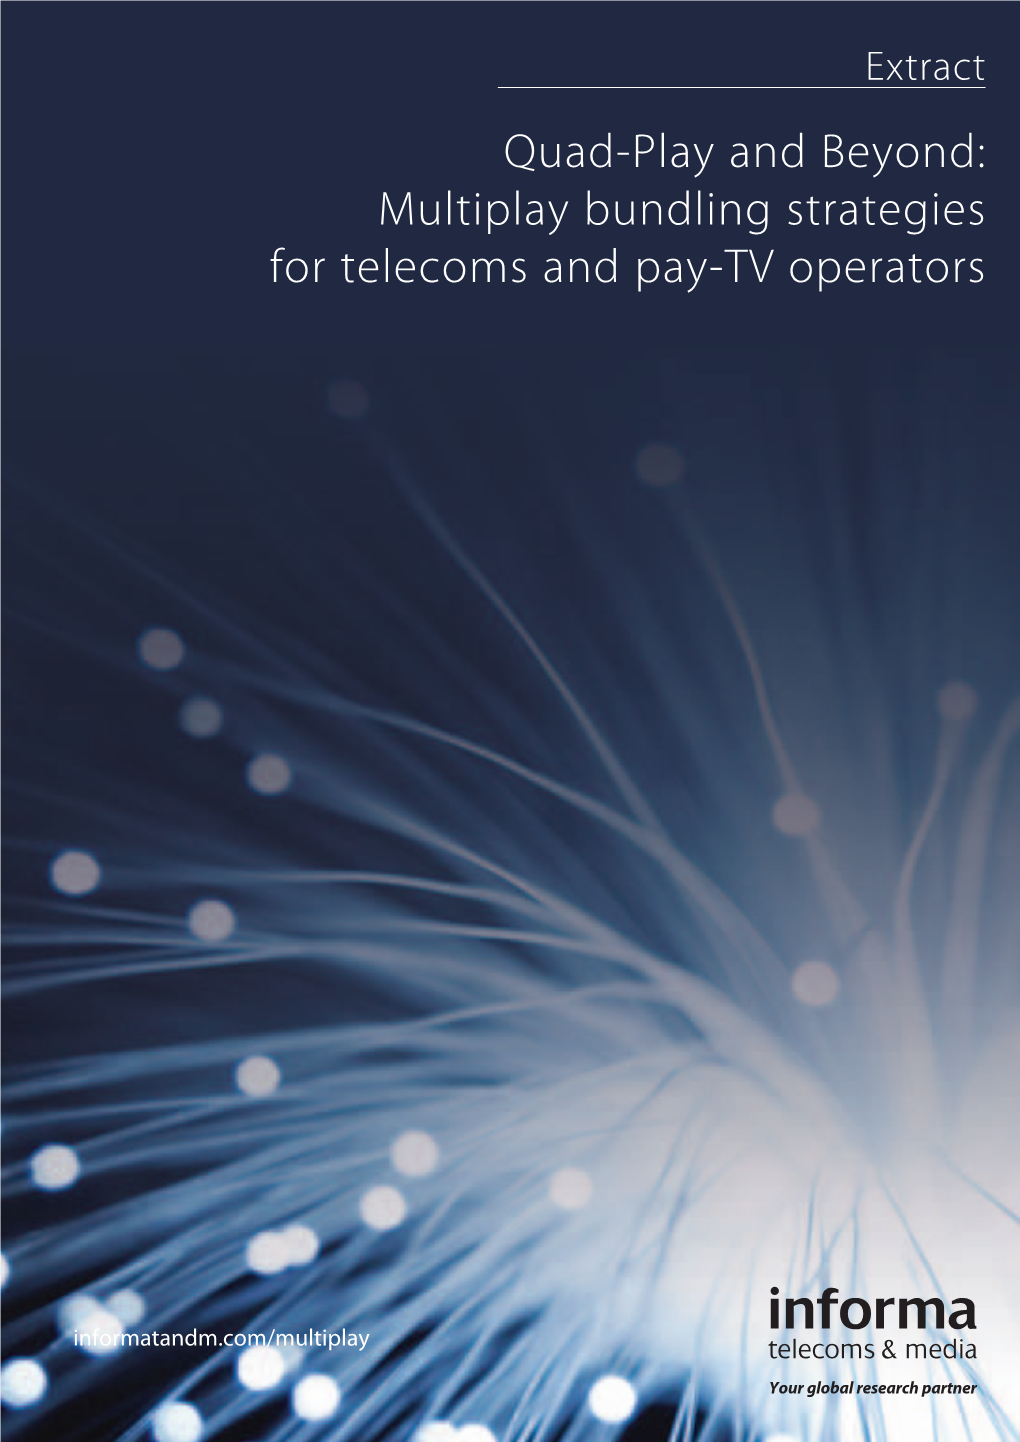 Quad-Play and Beyond: Multiplay Bundling Strategies for Telecoms and Pay-TV Operators